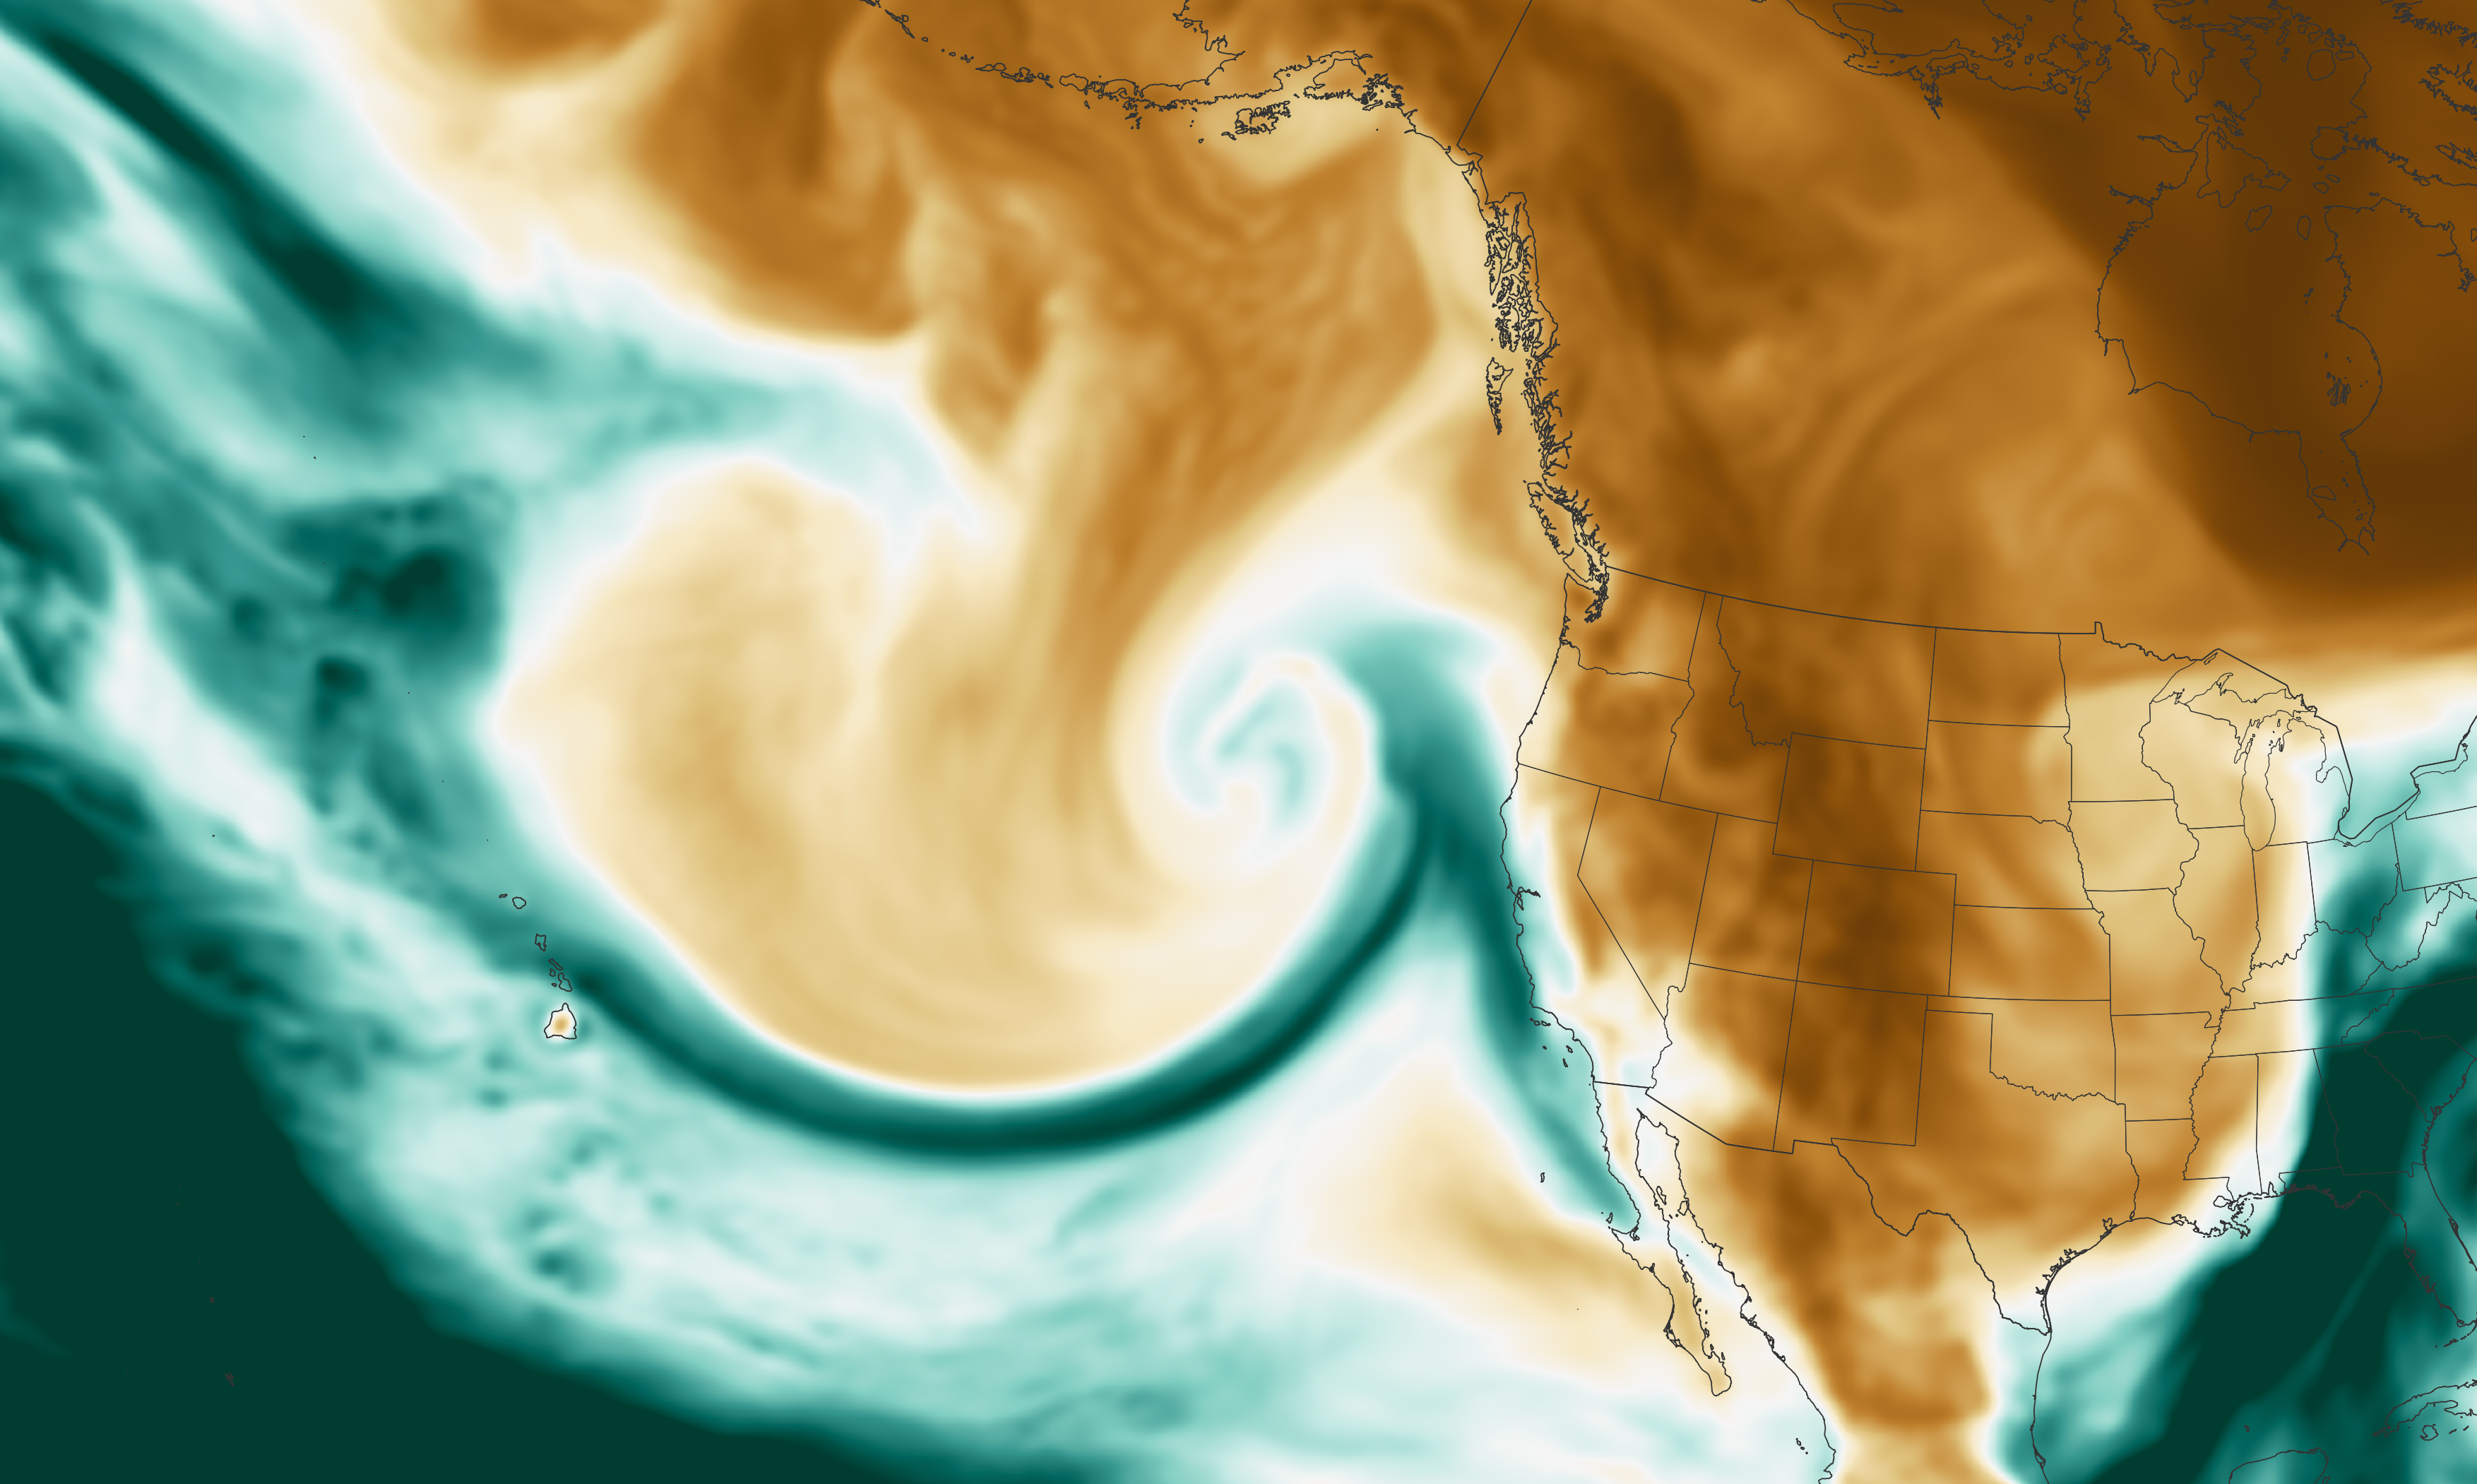 Atmospheric River Lashes California - related image preview